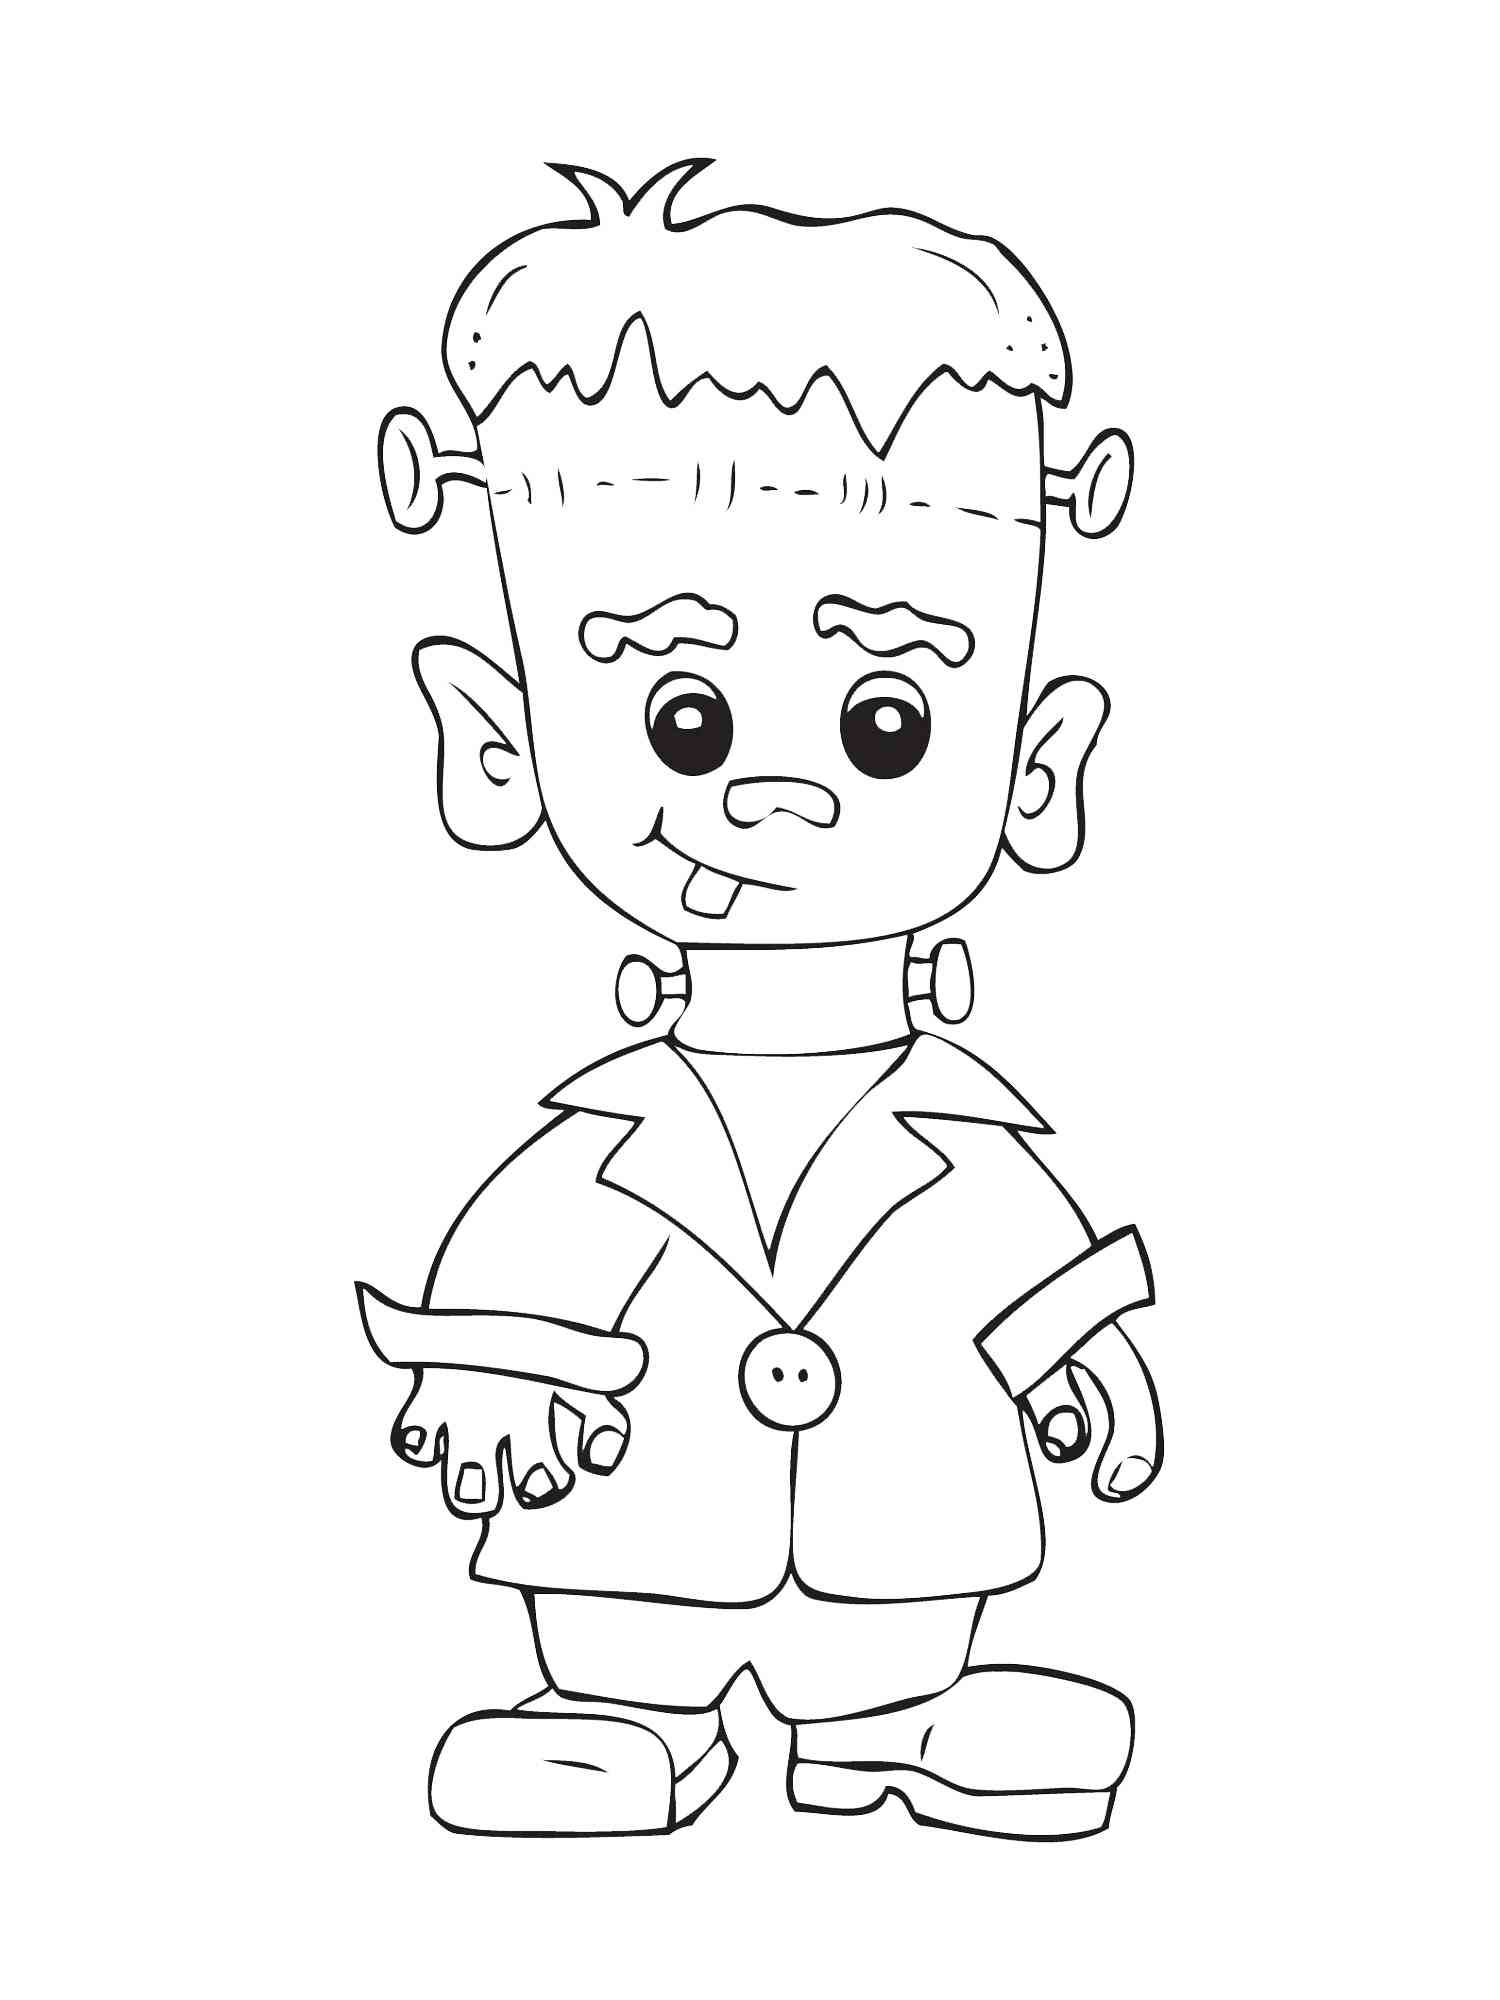 Frankenstein coloring pages. Free printable Frankenstein coloring pages